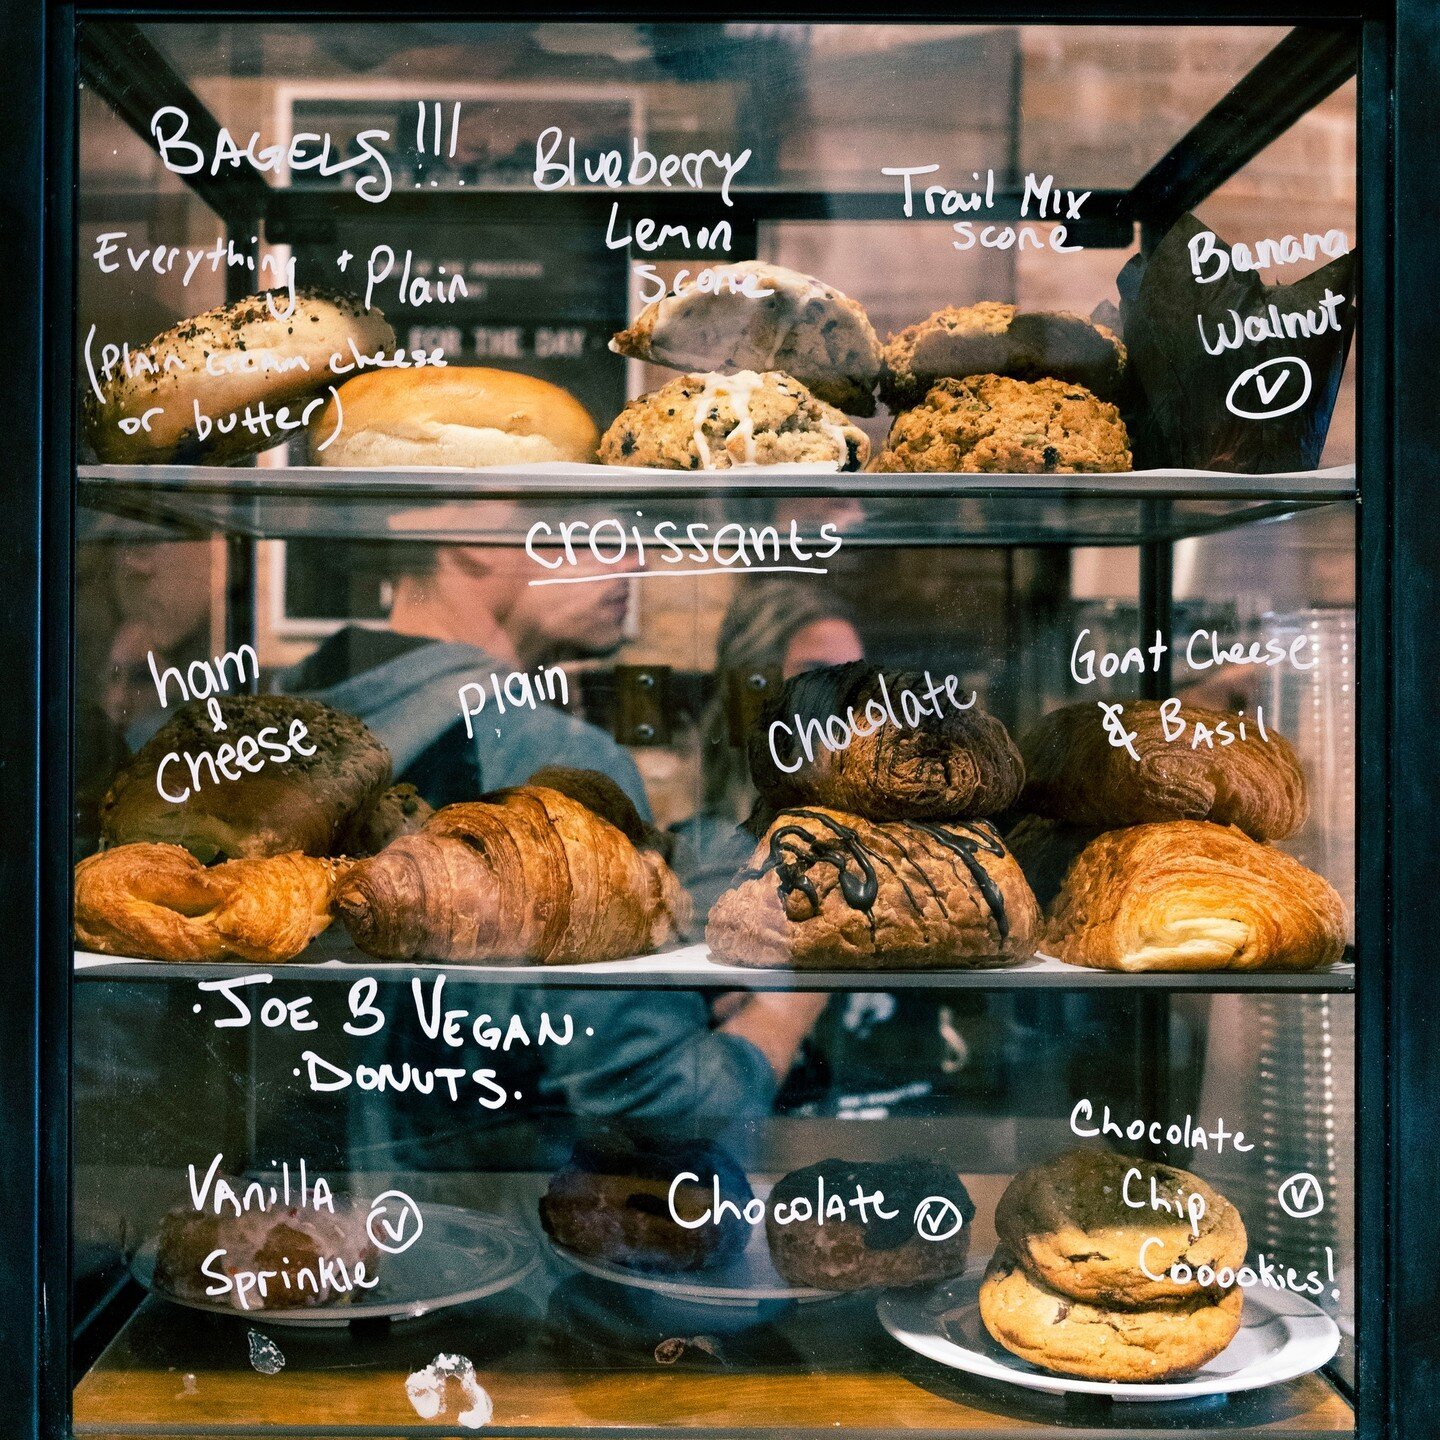 A drool-worthy full pastry case -- grab something tasty until 1PM today! 🤘